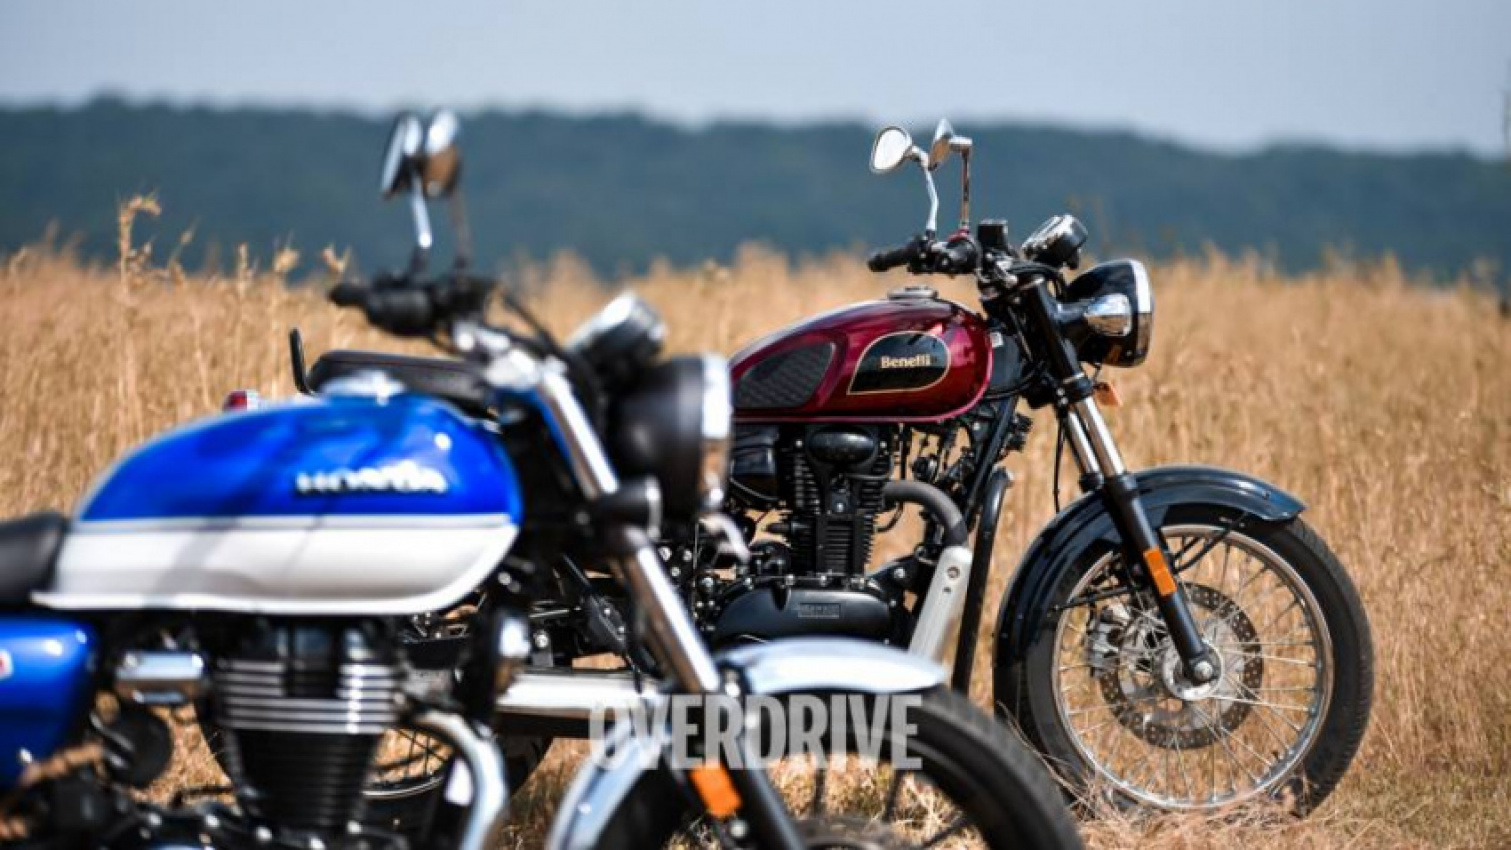 autos, benelli, cars, honda, hness cb350 vs meteor 350, honda cb350, honda h'ness cb350, honda highness 350, honda highness cb350, honda highness cb350 vs royal enfield classic 350, honda highness vs royal enfield meteor, india, meteor 350, meteor 350 royal enfield, meteor 350 vs cb350, meteor 350 vs honda highness, overdrive, review, rohit paradkar, royal enfield, royal enfield classic 350, royal enfield meteor 350, royal enfield meteor 350 review, royal enfield meteor 350 vs honda cb350 highness, royal enfield vs honda, honda h'ness cb350 vs royal enfield meteor 350, classic 350 & benelli imperiale 400